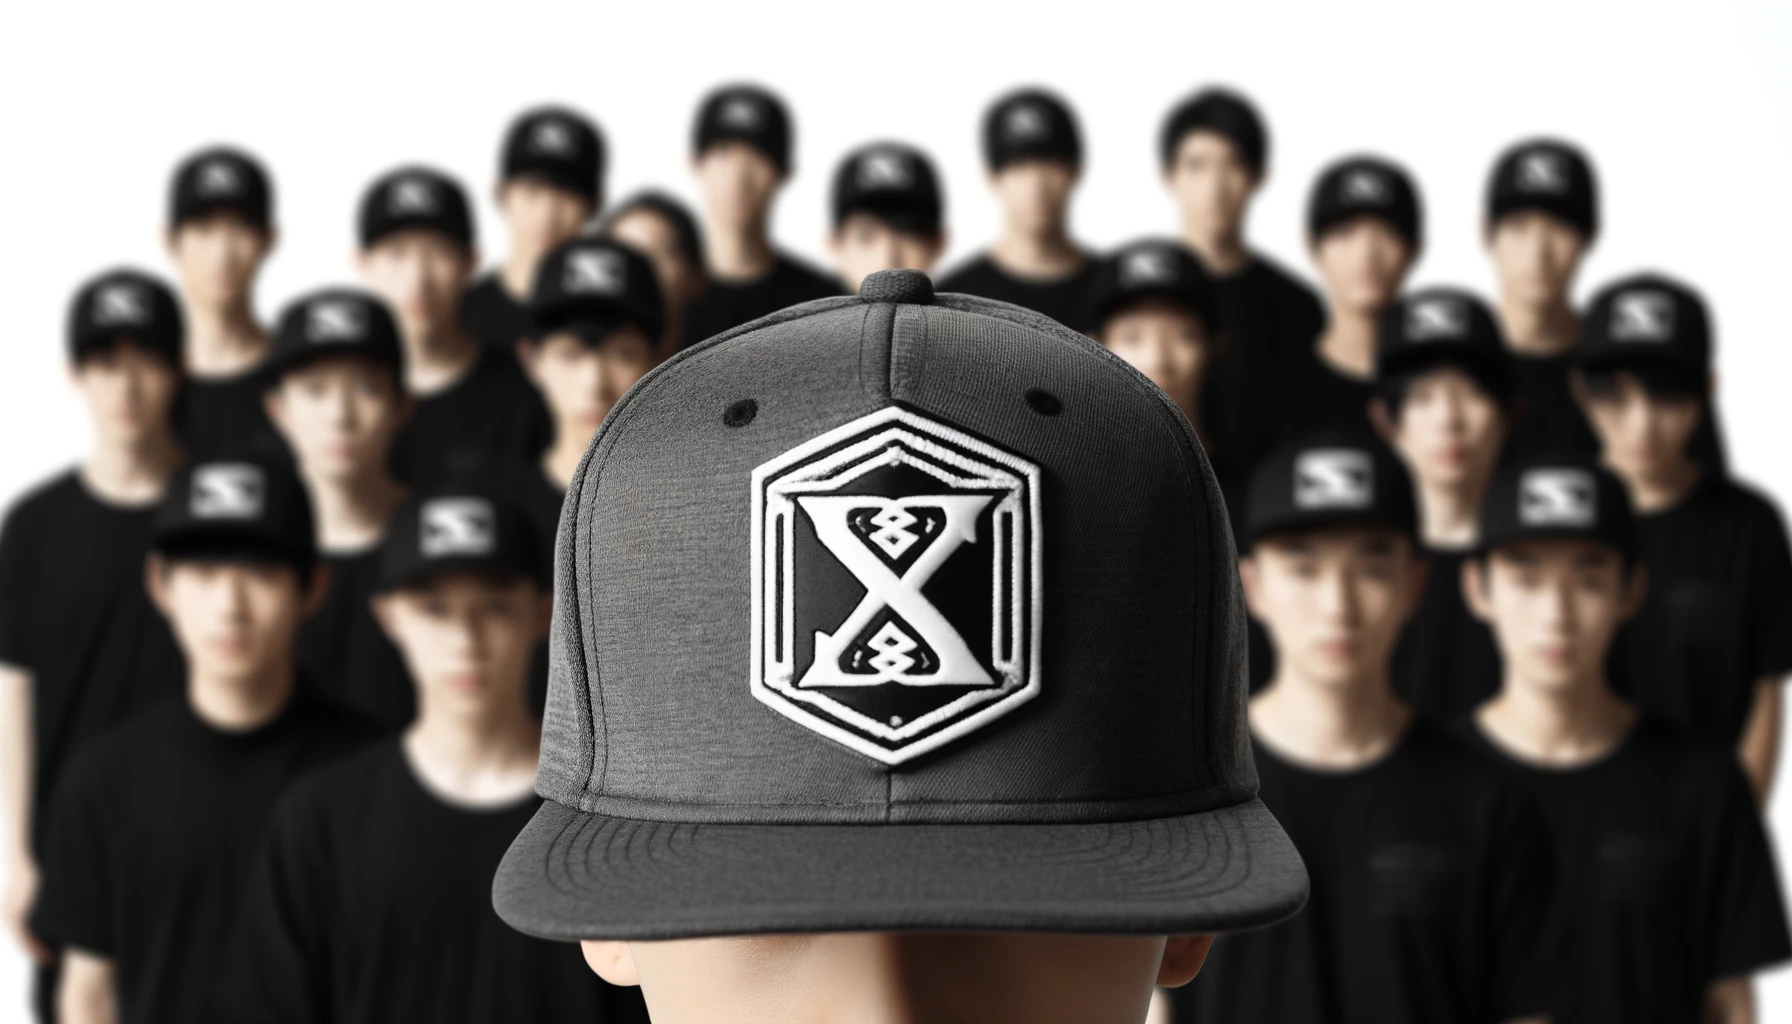 Japanese people wearing a cap with a large black and white logo in the center featuring 'SX' letters. The logo is blurred, removed, or not visible from the angle. The image showcases a group of Japanese people, highlighting the cap's popularity.